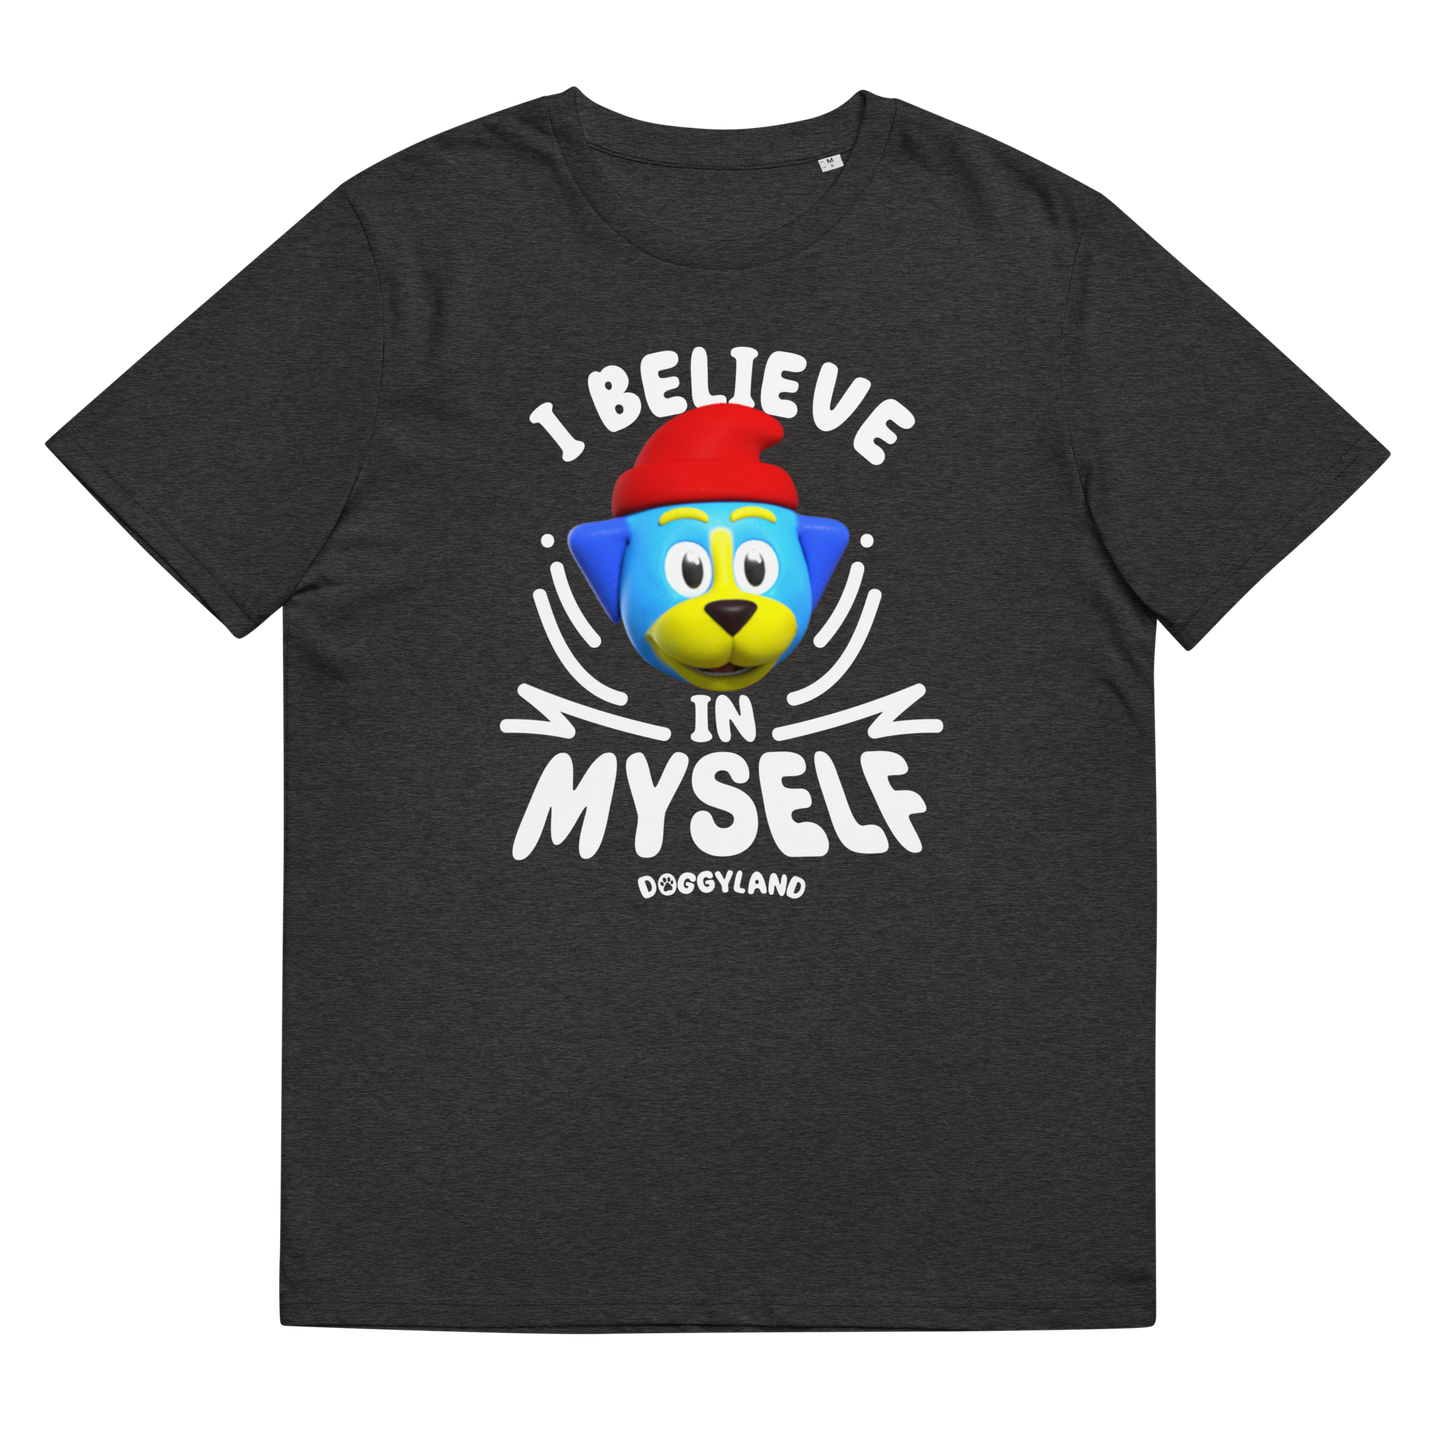 Adult Woofee "I Believe In Myself" Affirmation Shirt